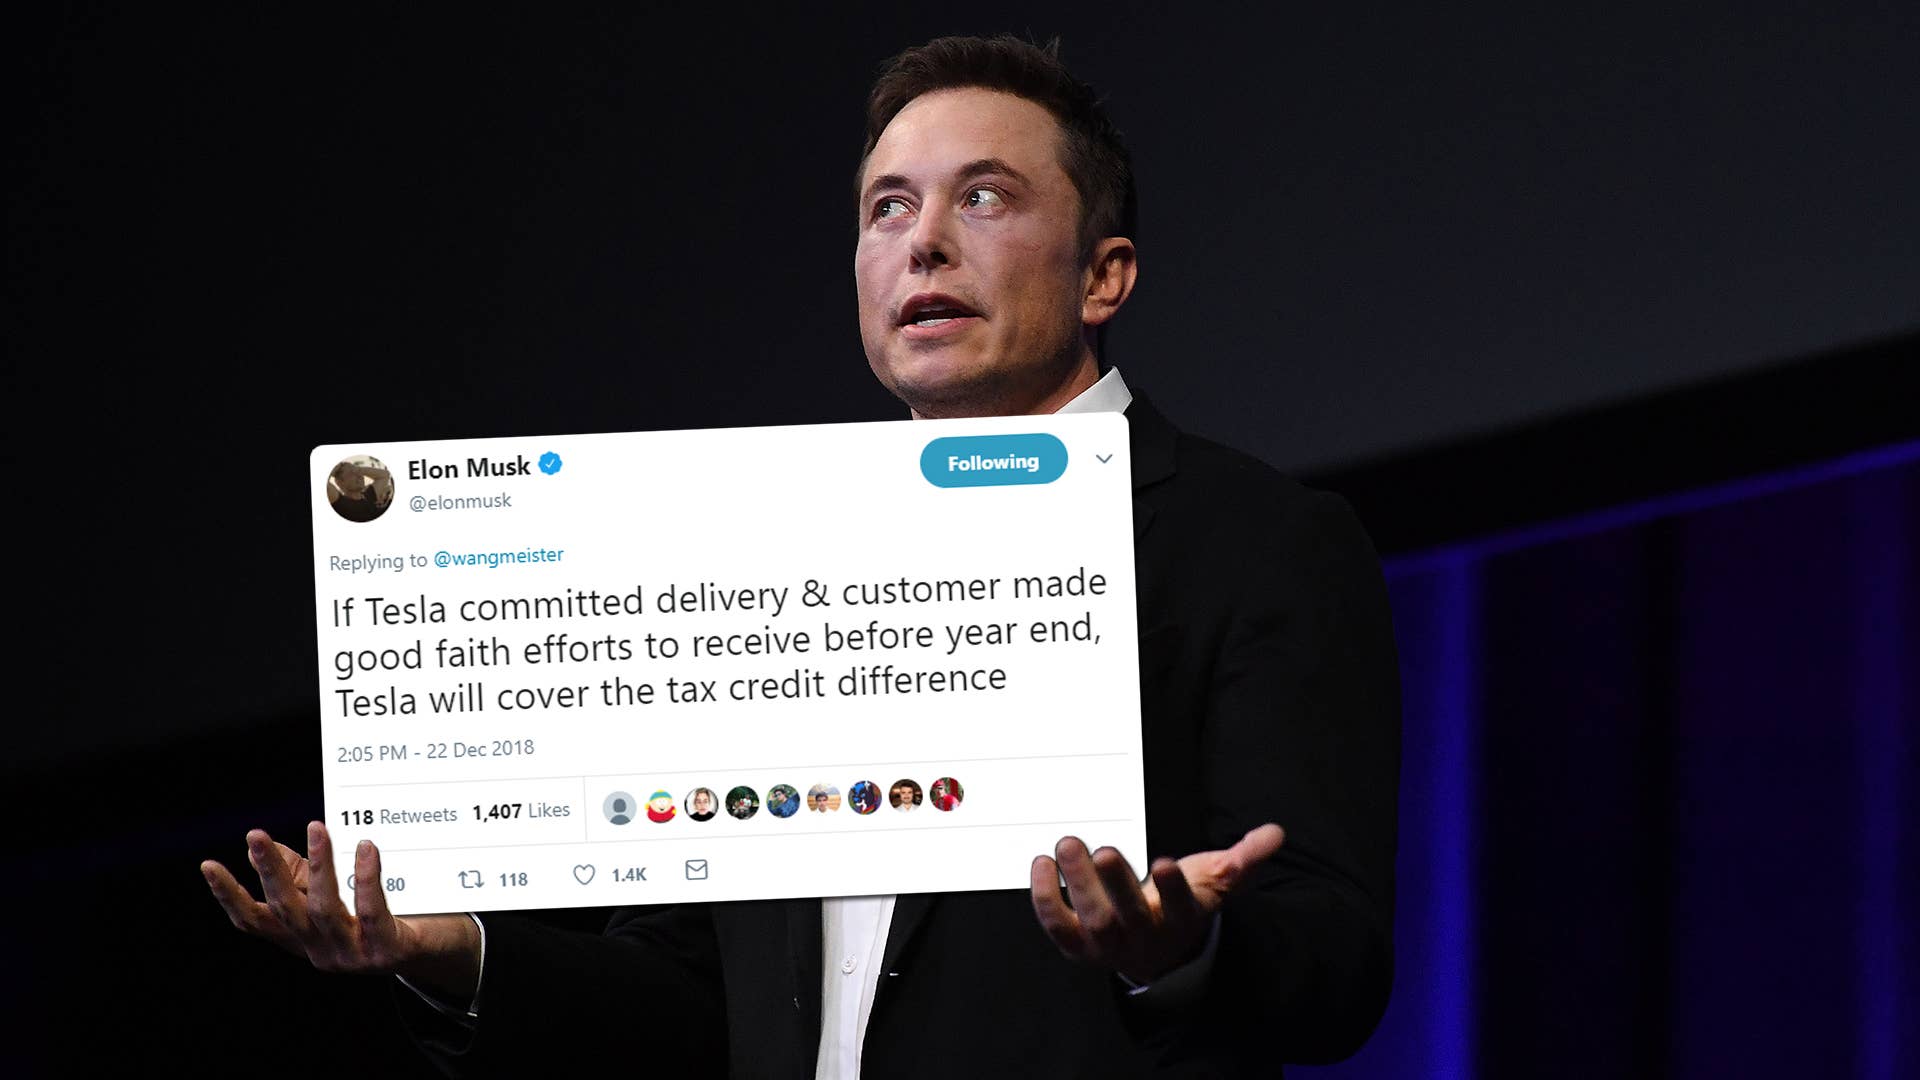 elon-musk-promises-to-repay-tax-credit-if-tesla-misses-year-end-delivery